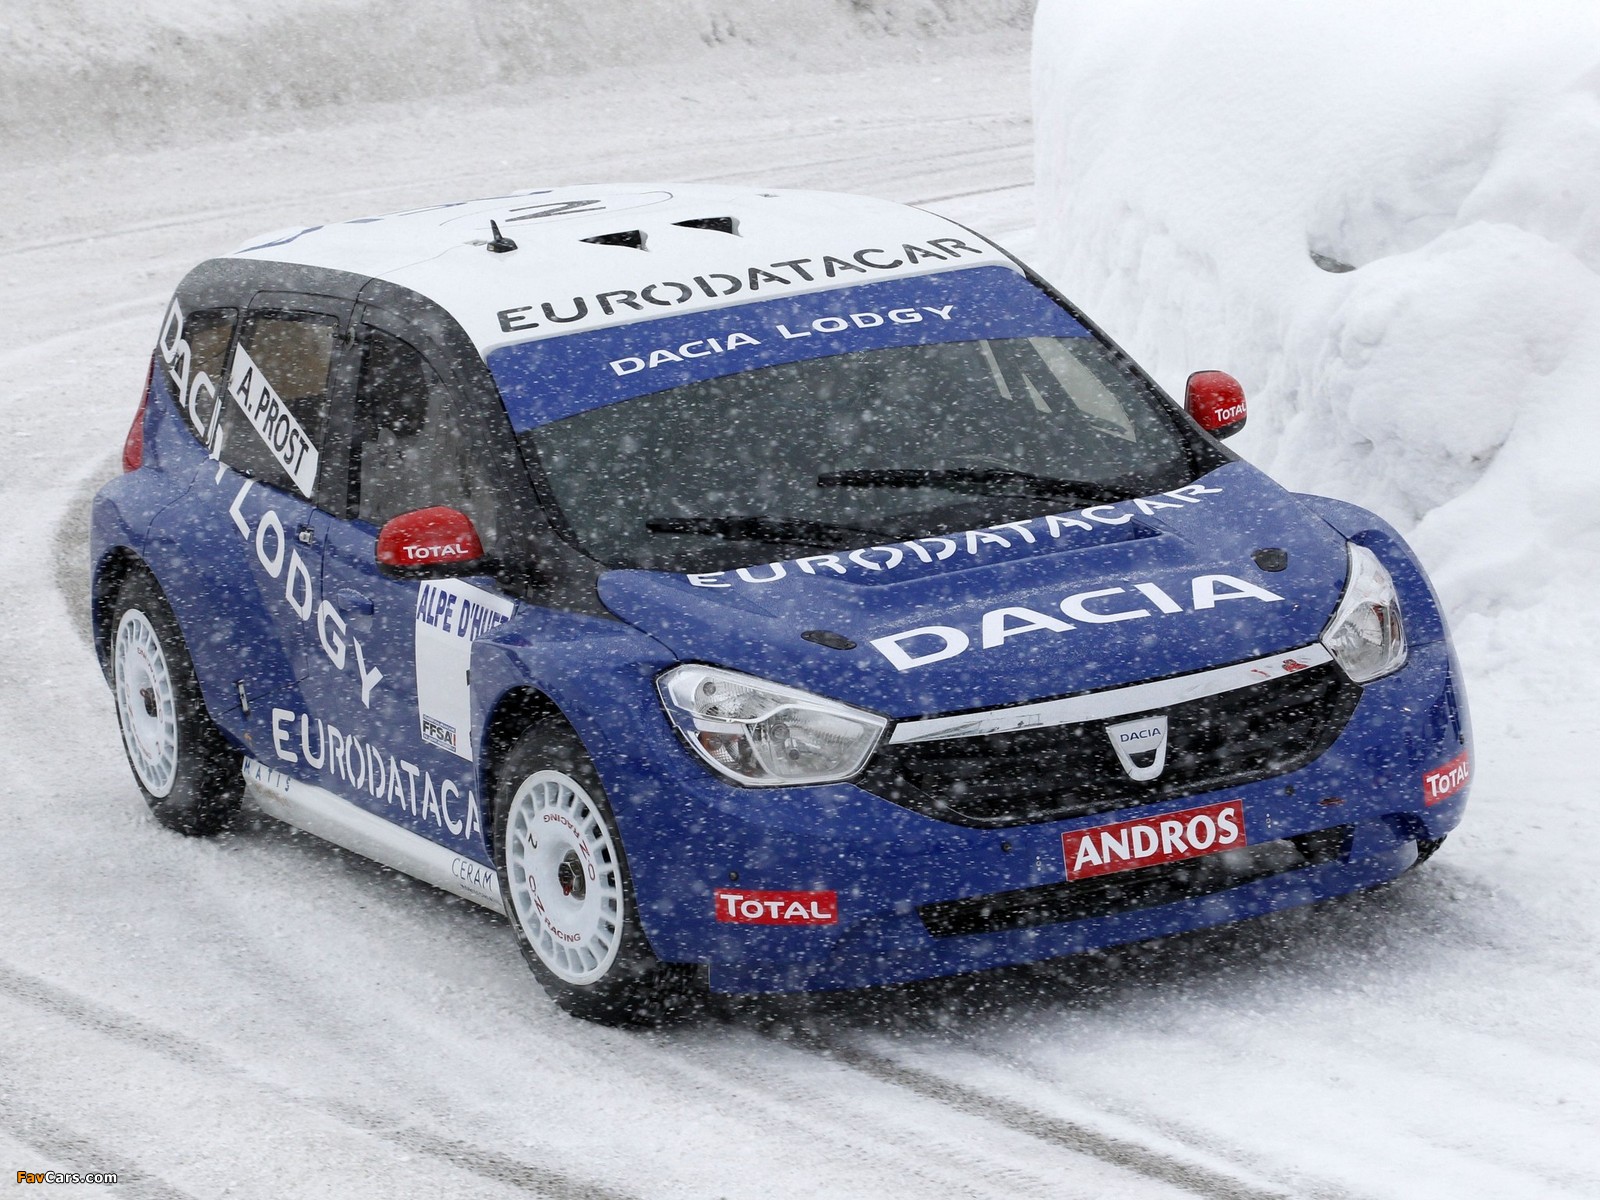 Dacia Lodgy Glace Trophée Andros 2011 wallpapers (1600 x 1200)